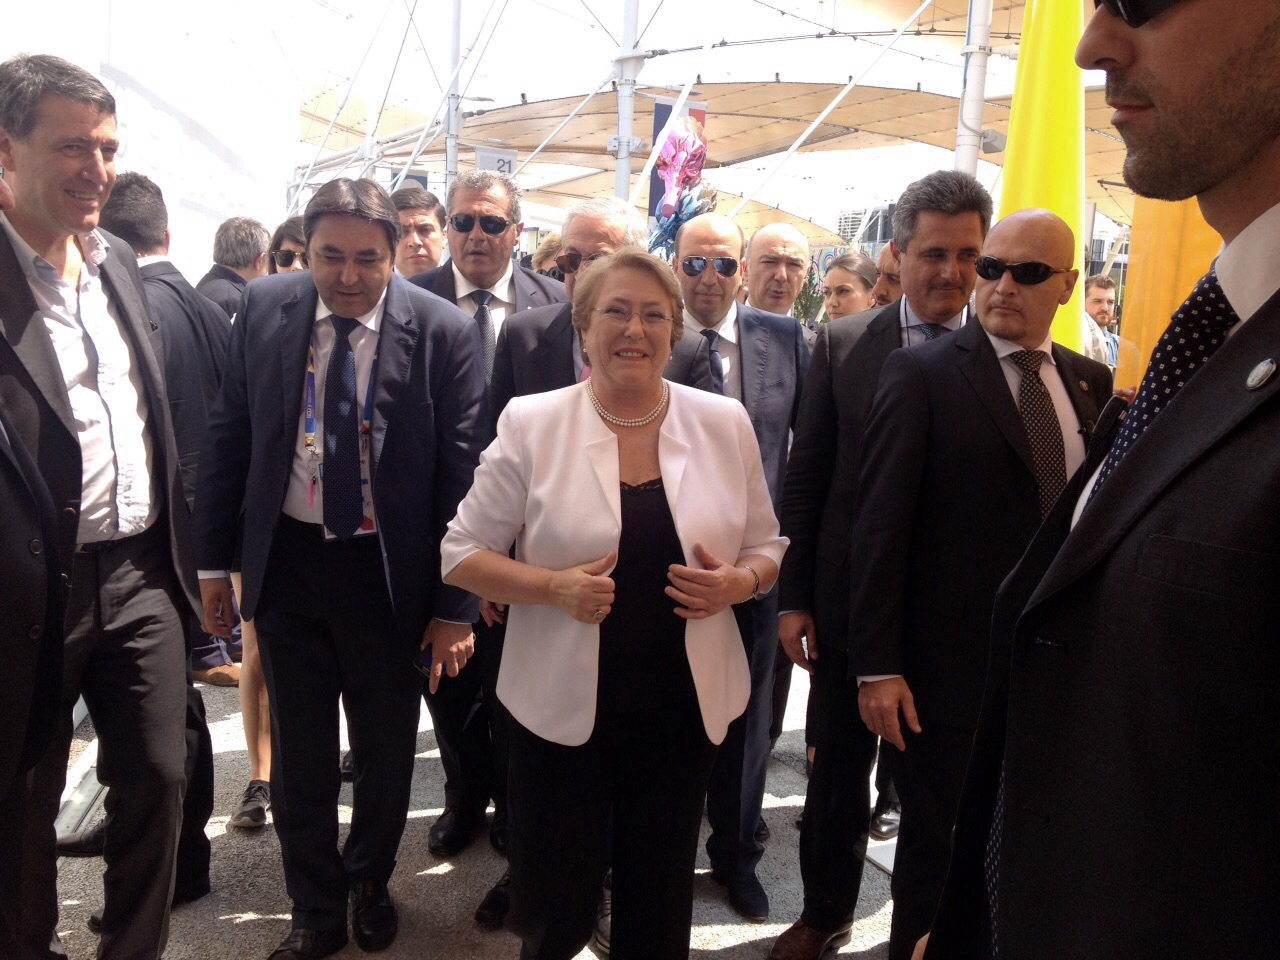 President of Chile Michelle Bachelet at Expo Milan 2015